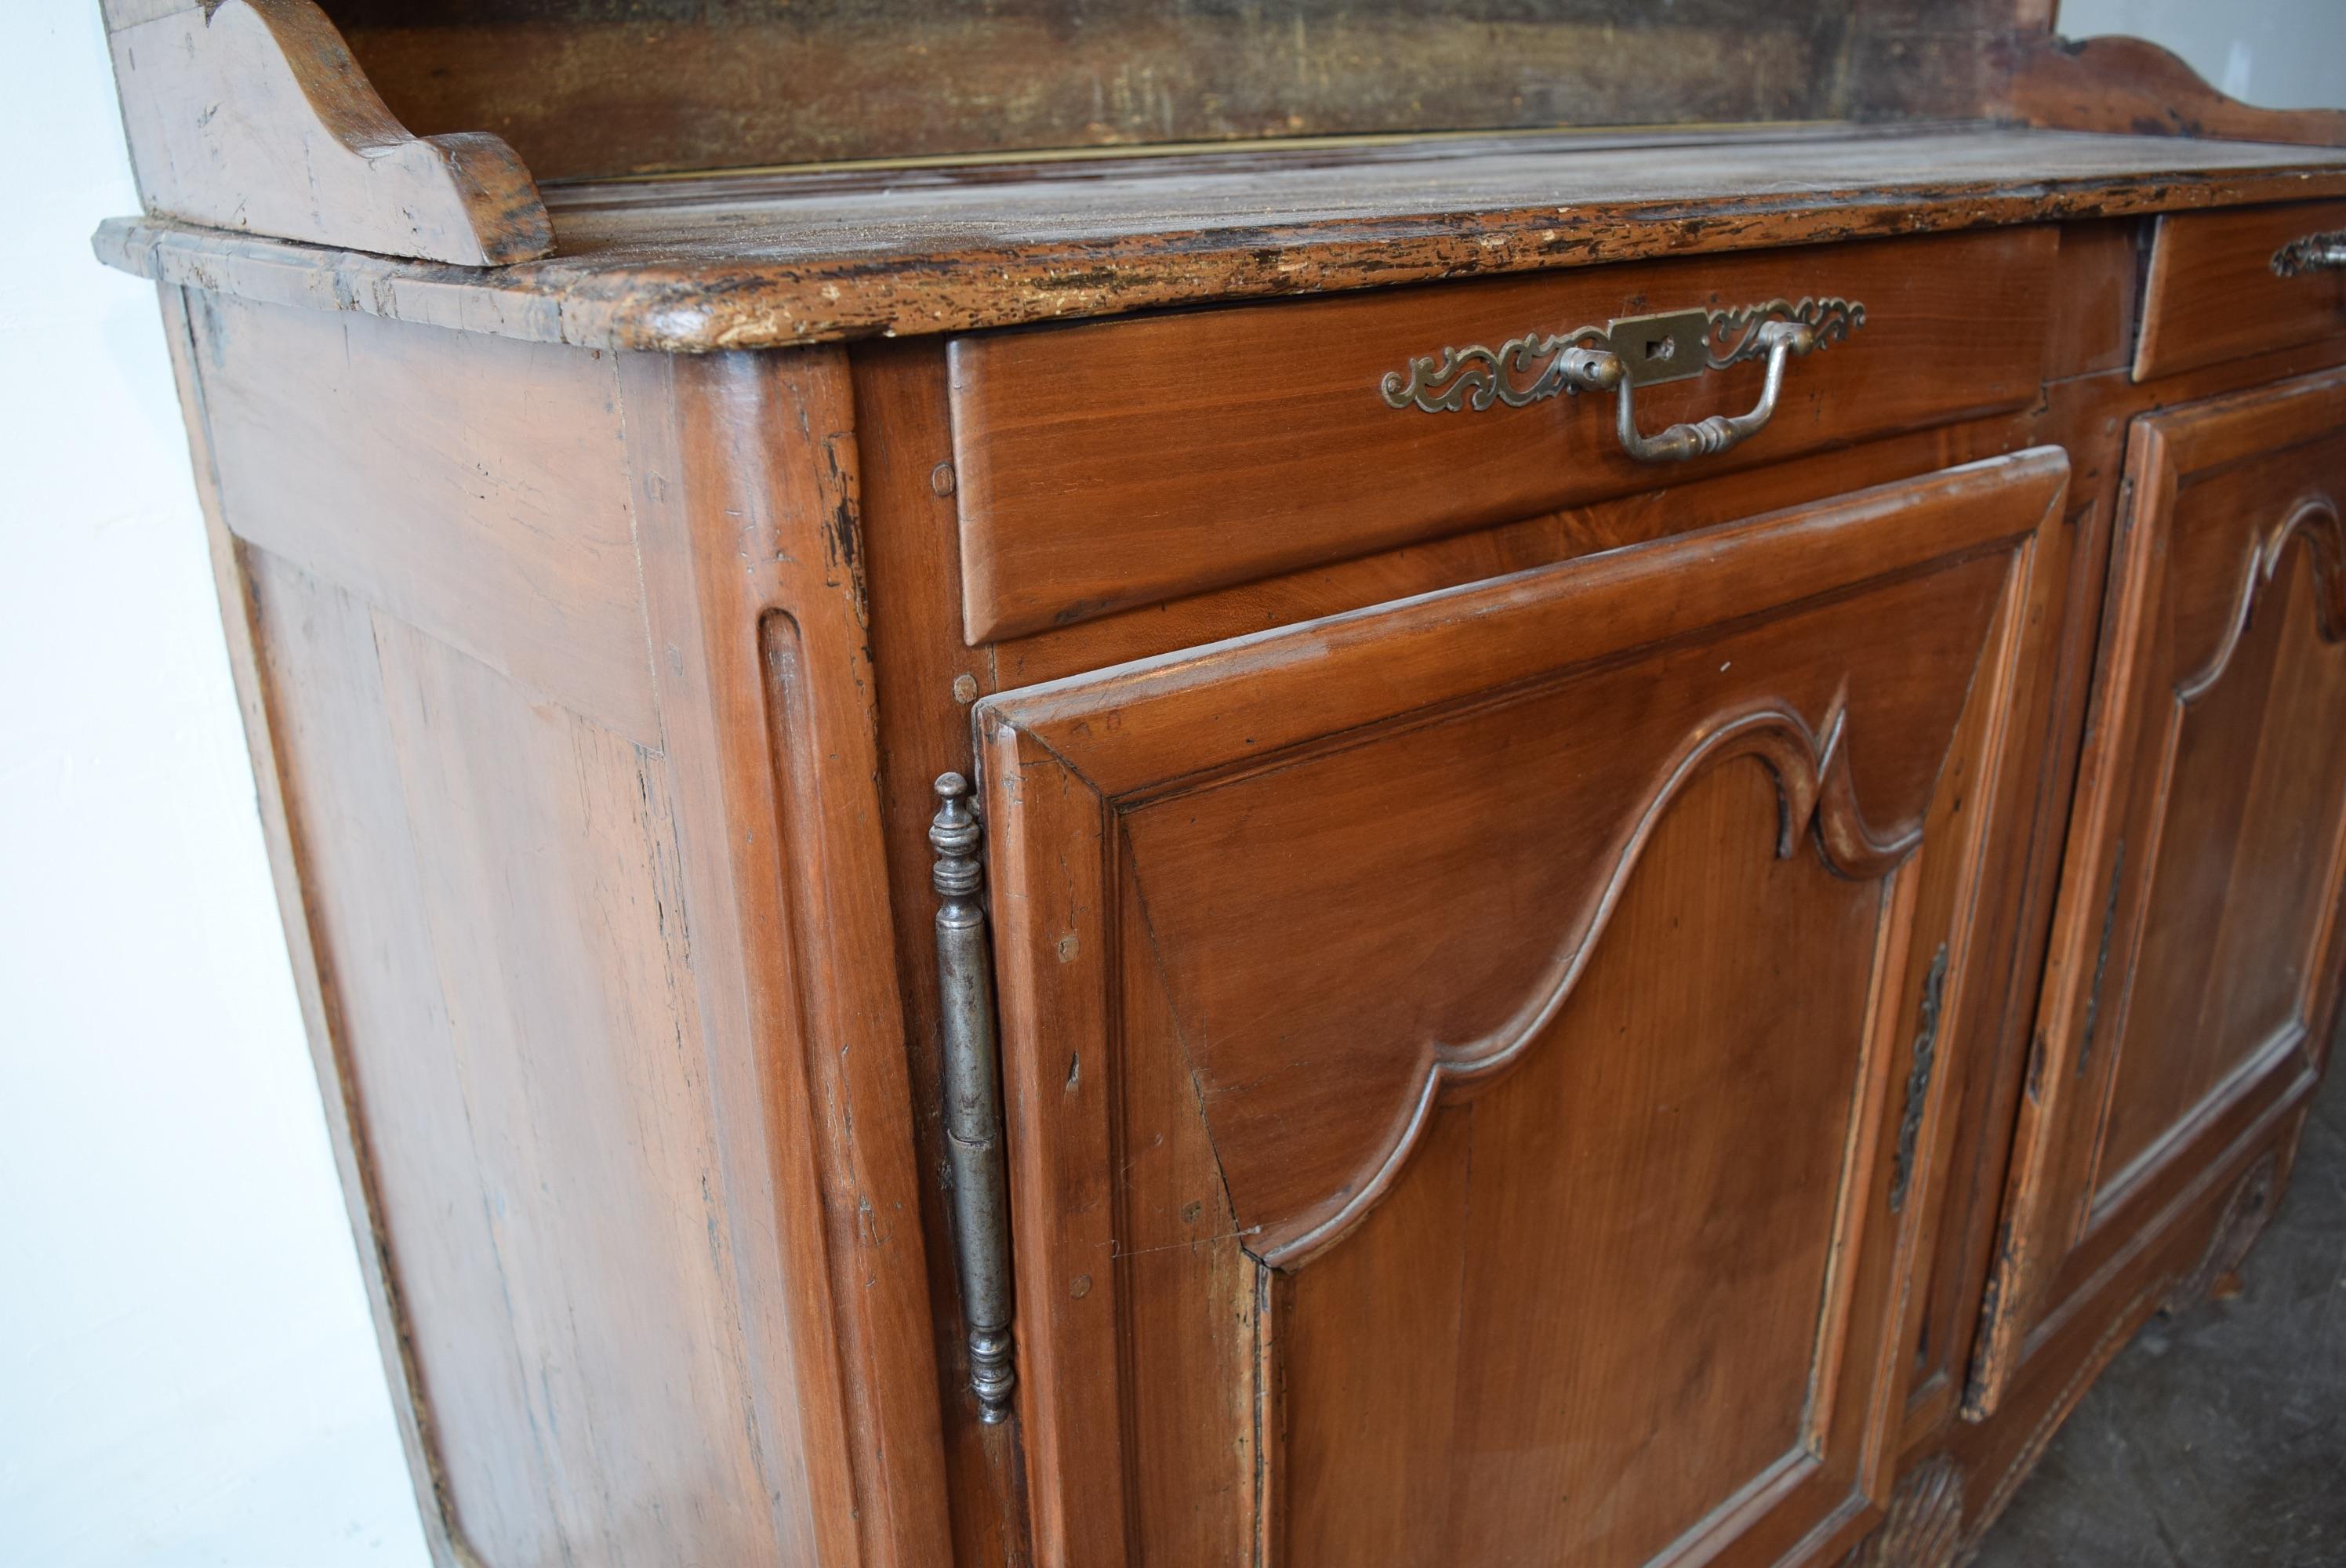 French cherrywood kitchen cupboard/vasselier, c. 1860-1880. Handsomely carved with double drawers above cabinet doors featuring iron fiche hinges. Both drawers feature original iron pulls and matching iron escutcheons on each door. The scallop shell